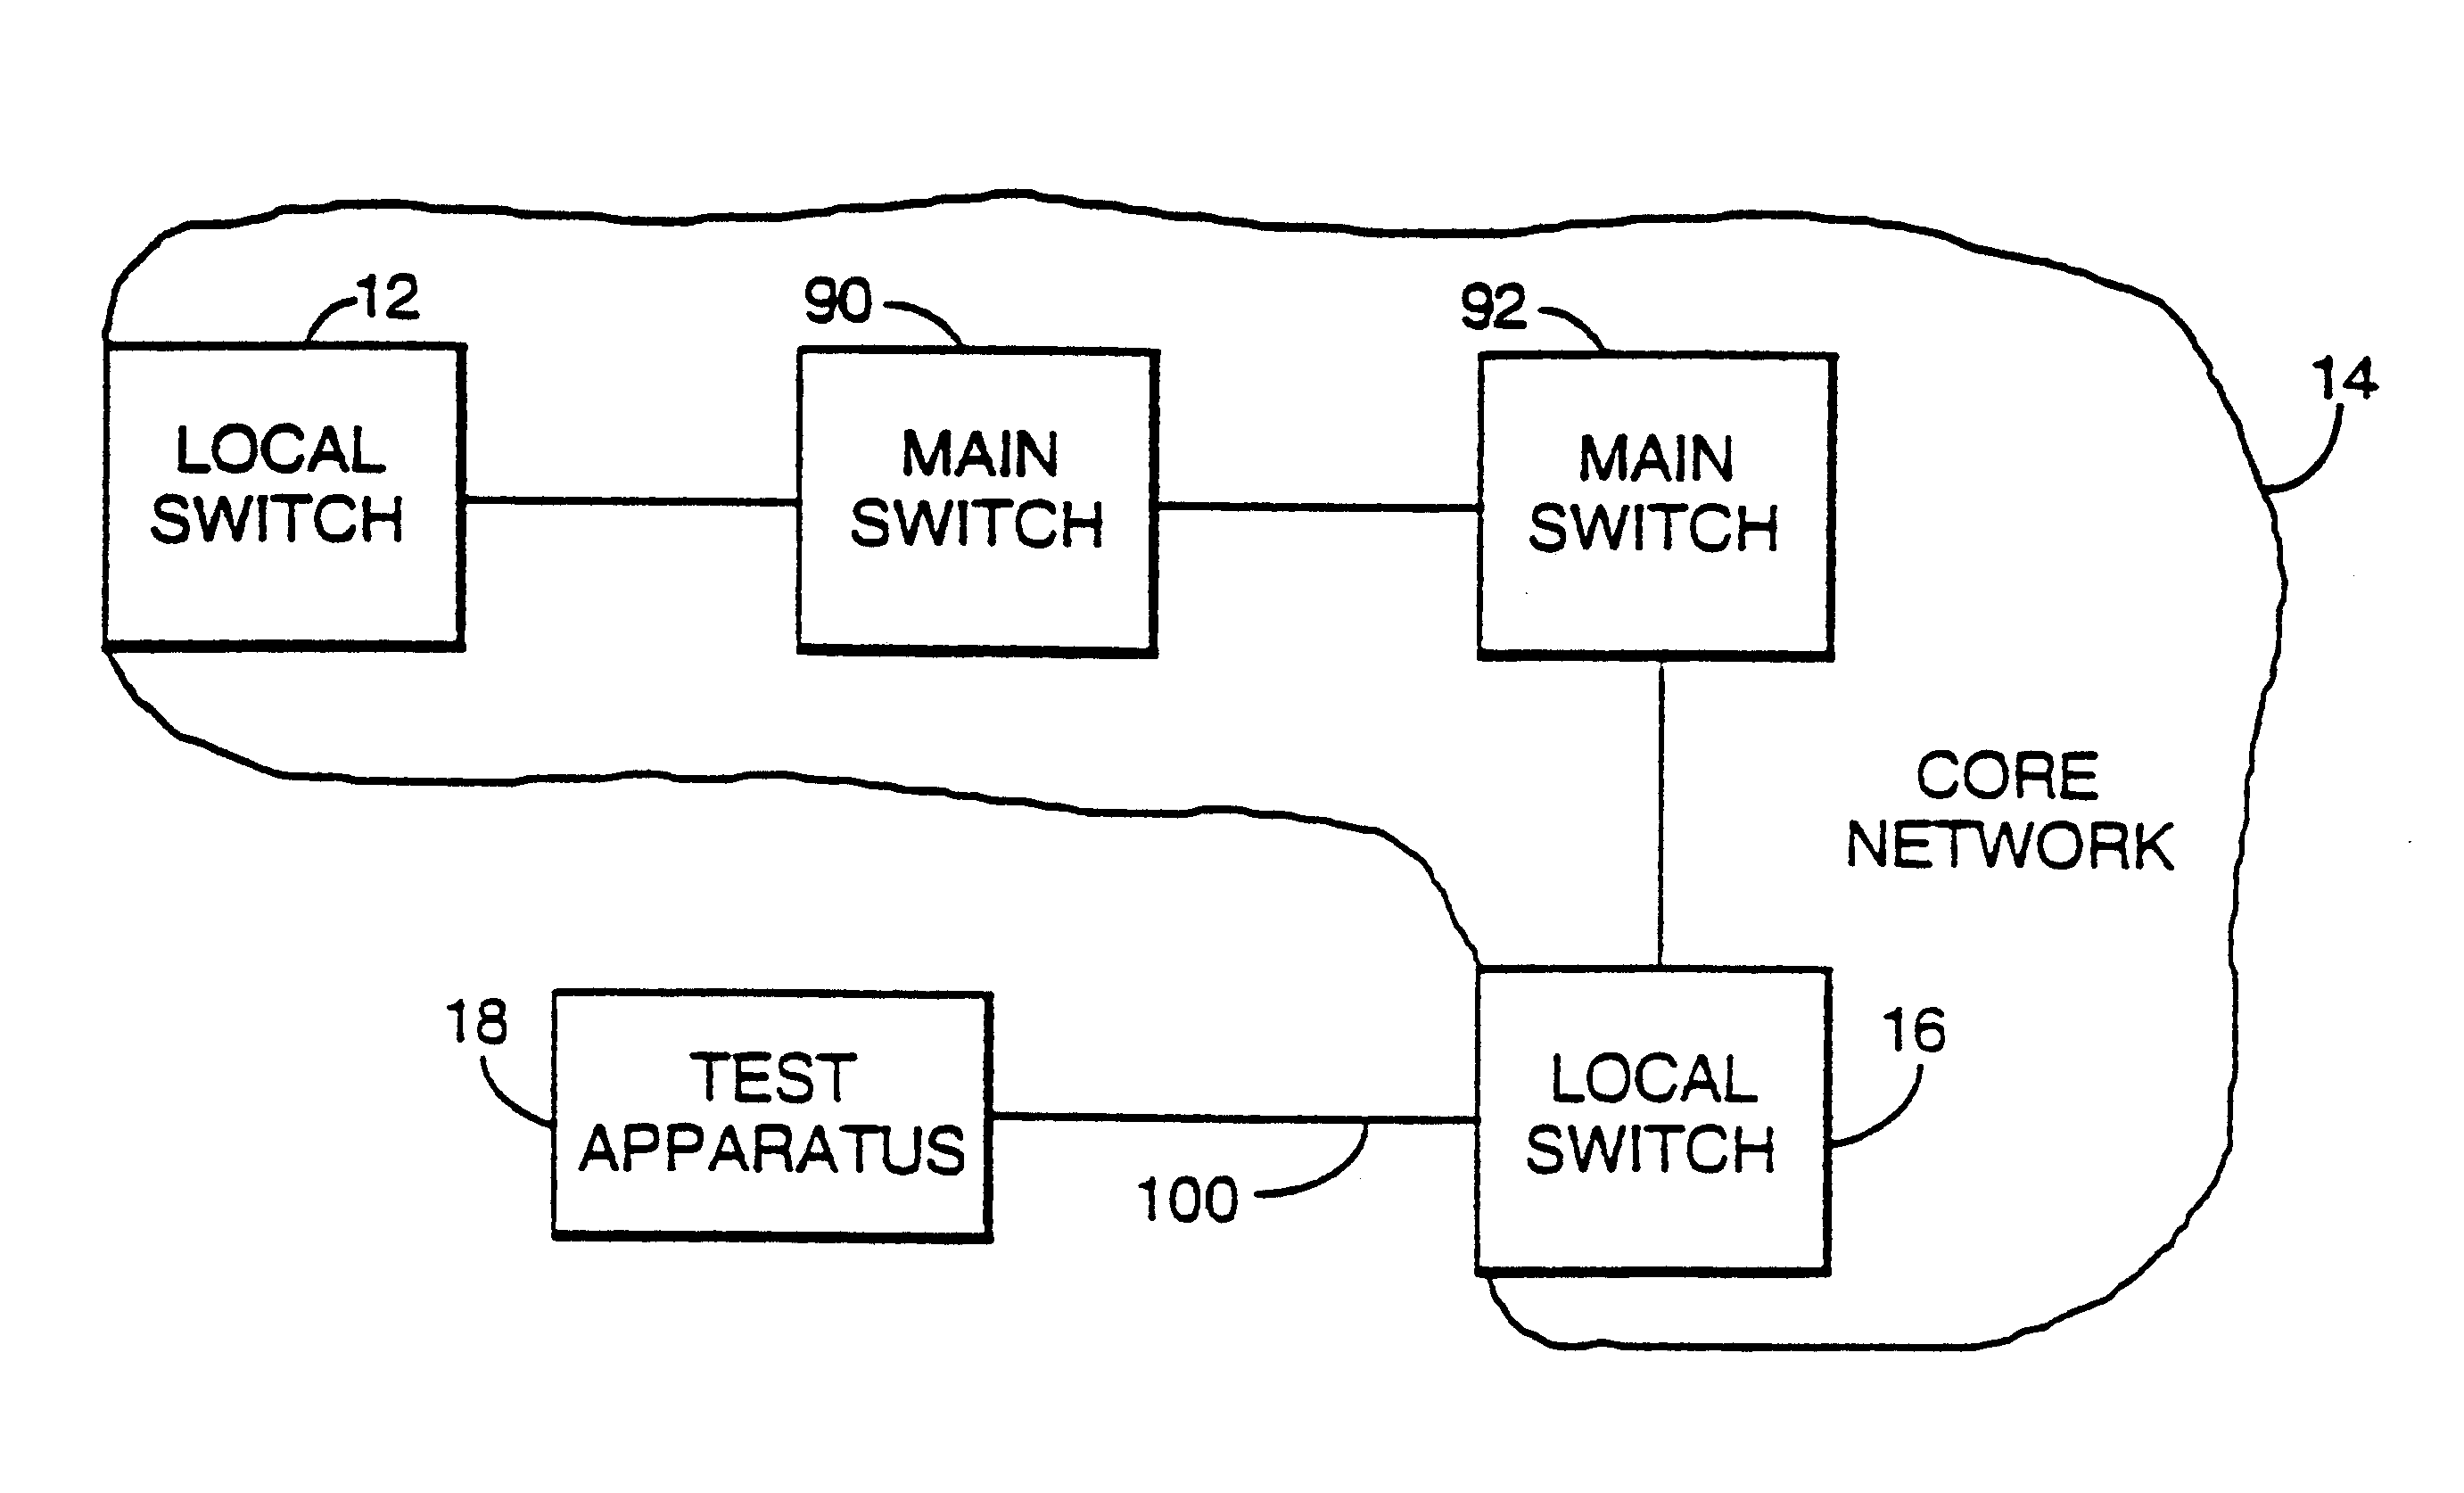 Line testing in a telecommunications network